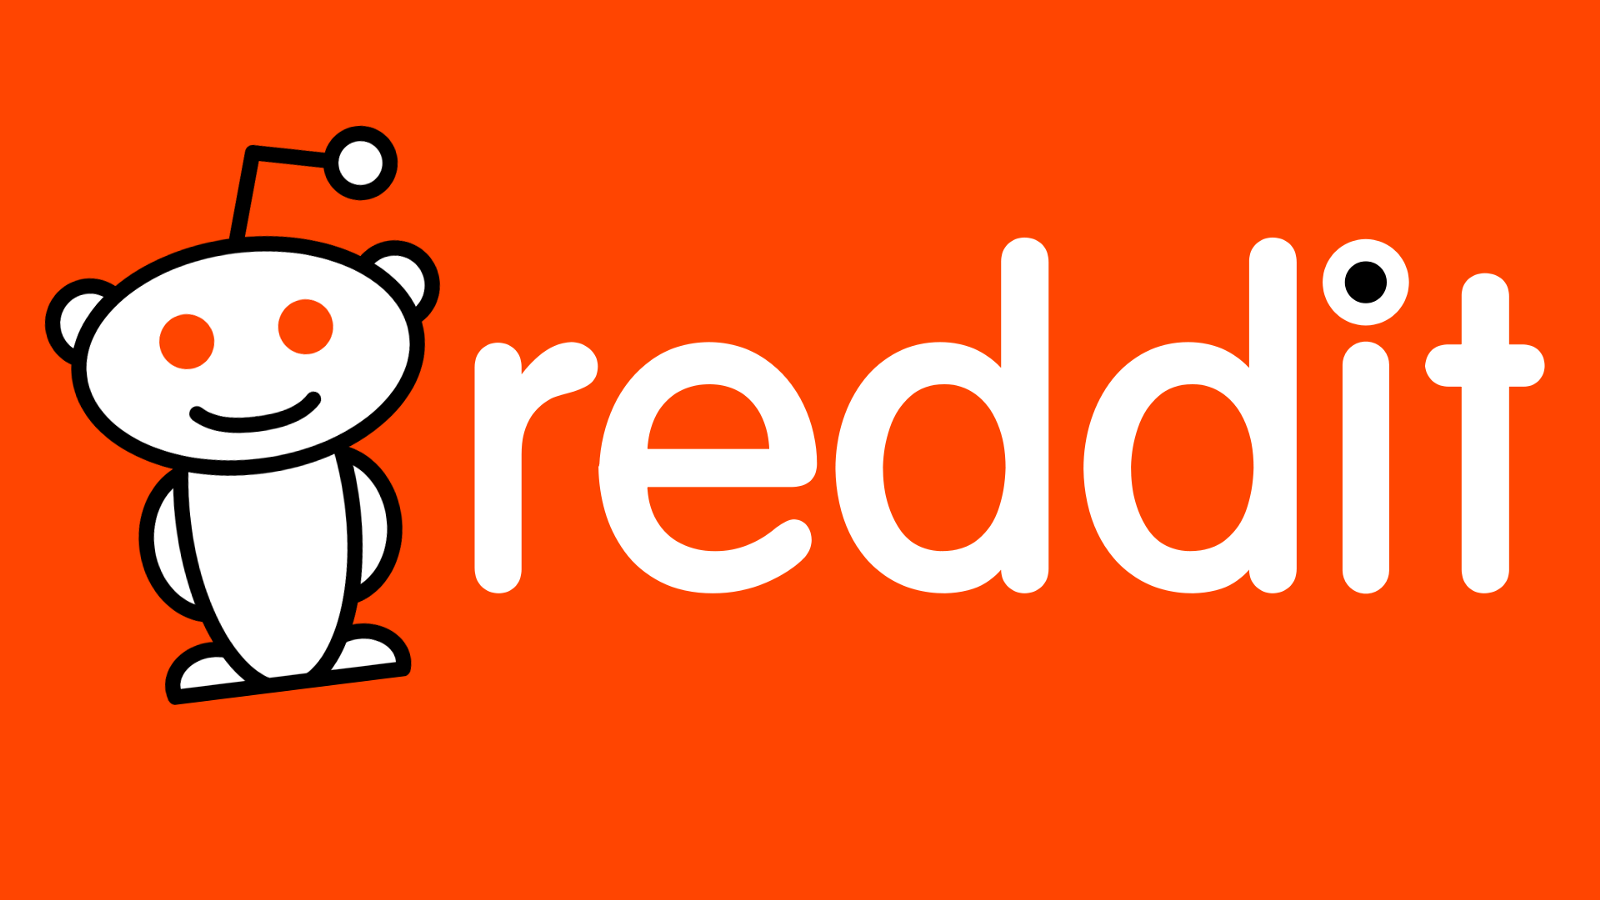 Reddit users are the least valuable of any social network